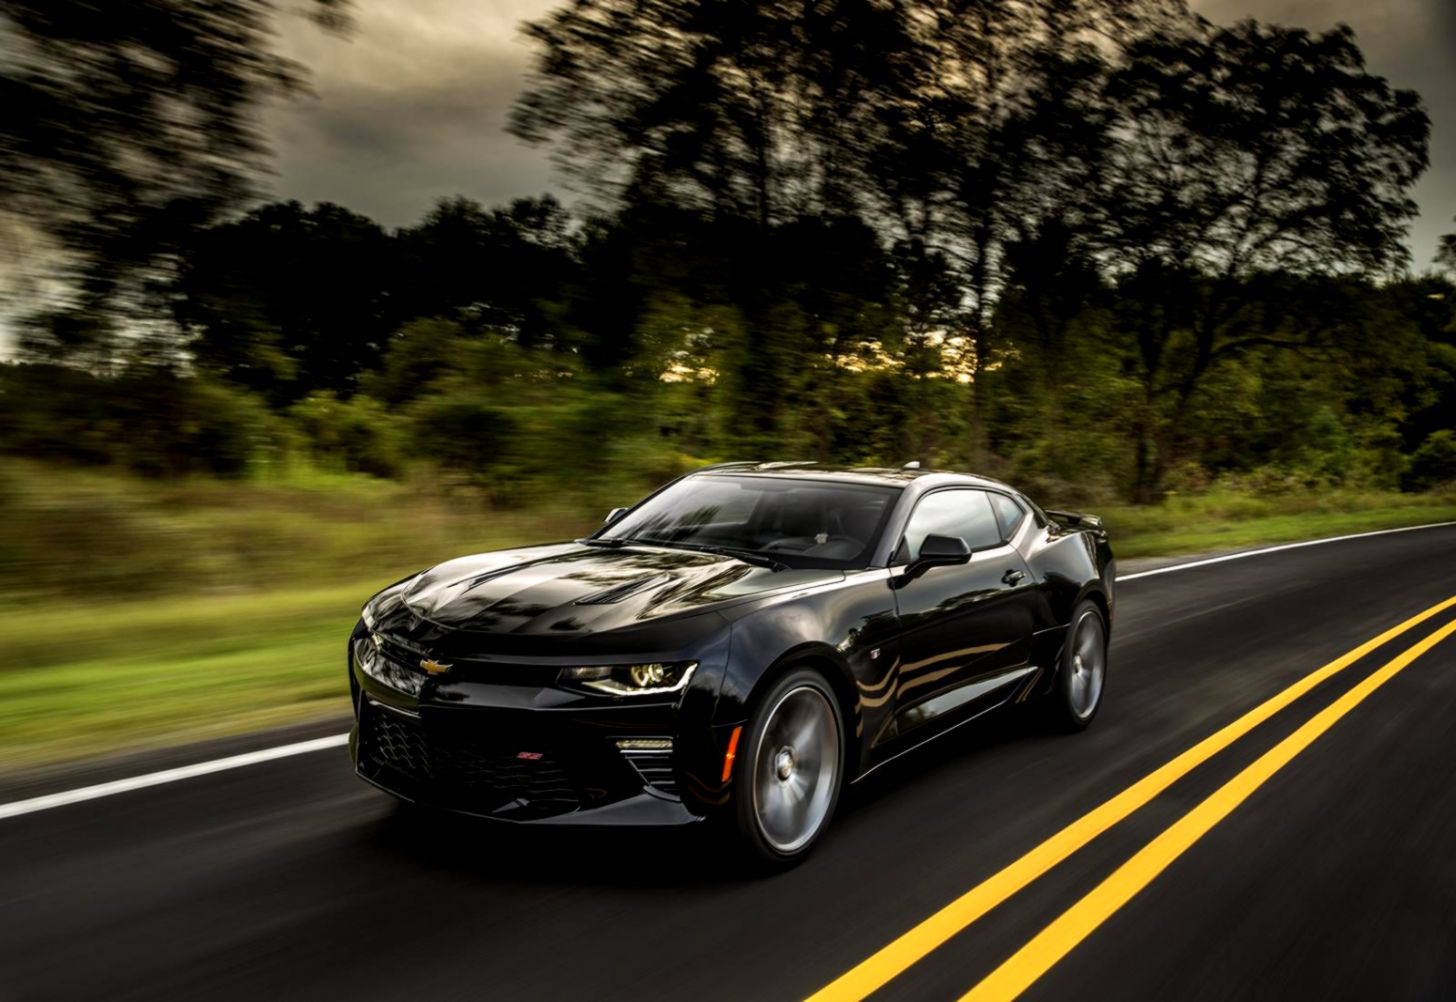 Chevrolet Camaro Ss Wallpapers And Background Images - Chevrolet Camaro 2016 - HD Wallpaper 